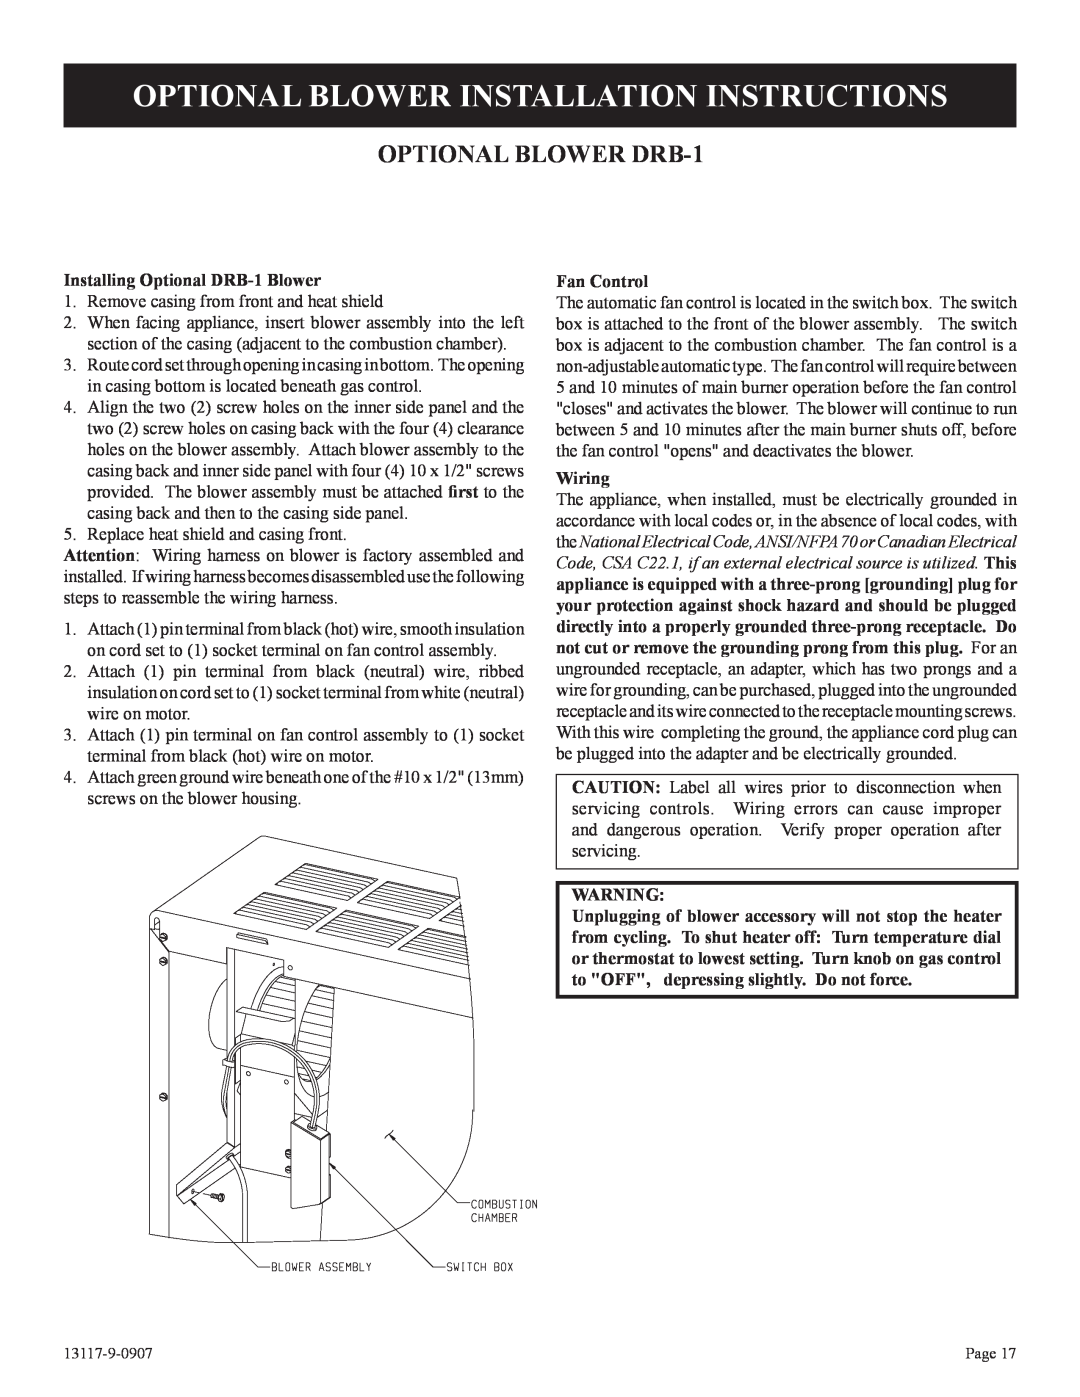 Empire Products DV-25T-1 Optional Blower Installation Instructions, OPTIONAL BLOWER DRB-1, Installing Optional DRB-1Blower 